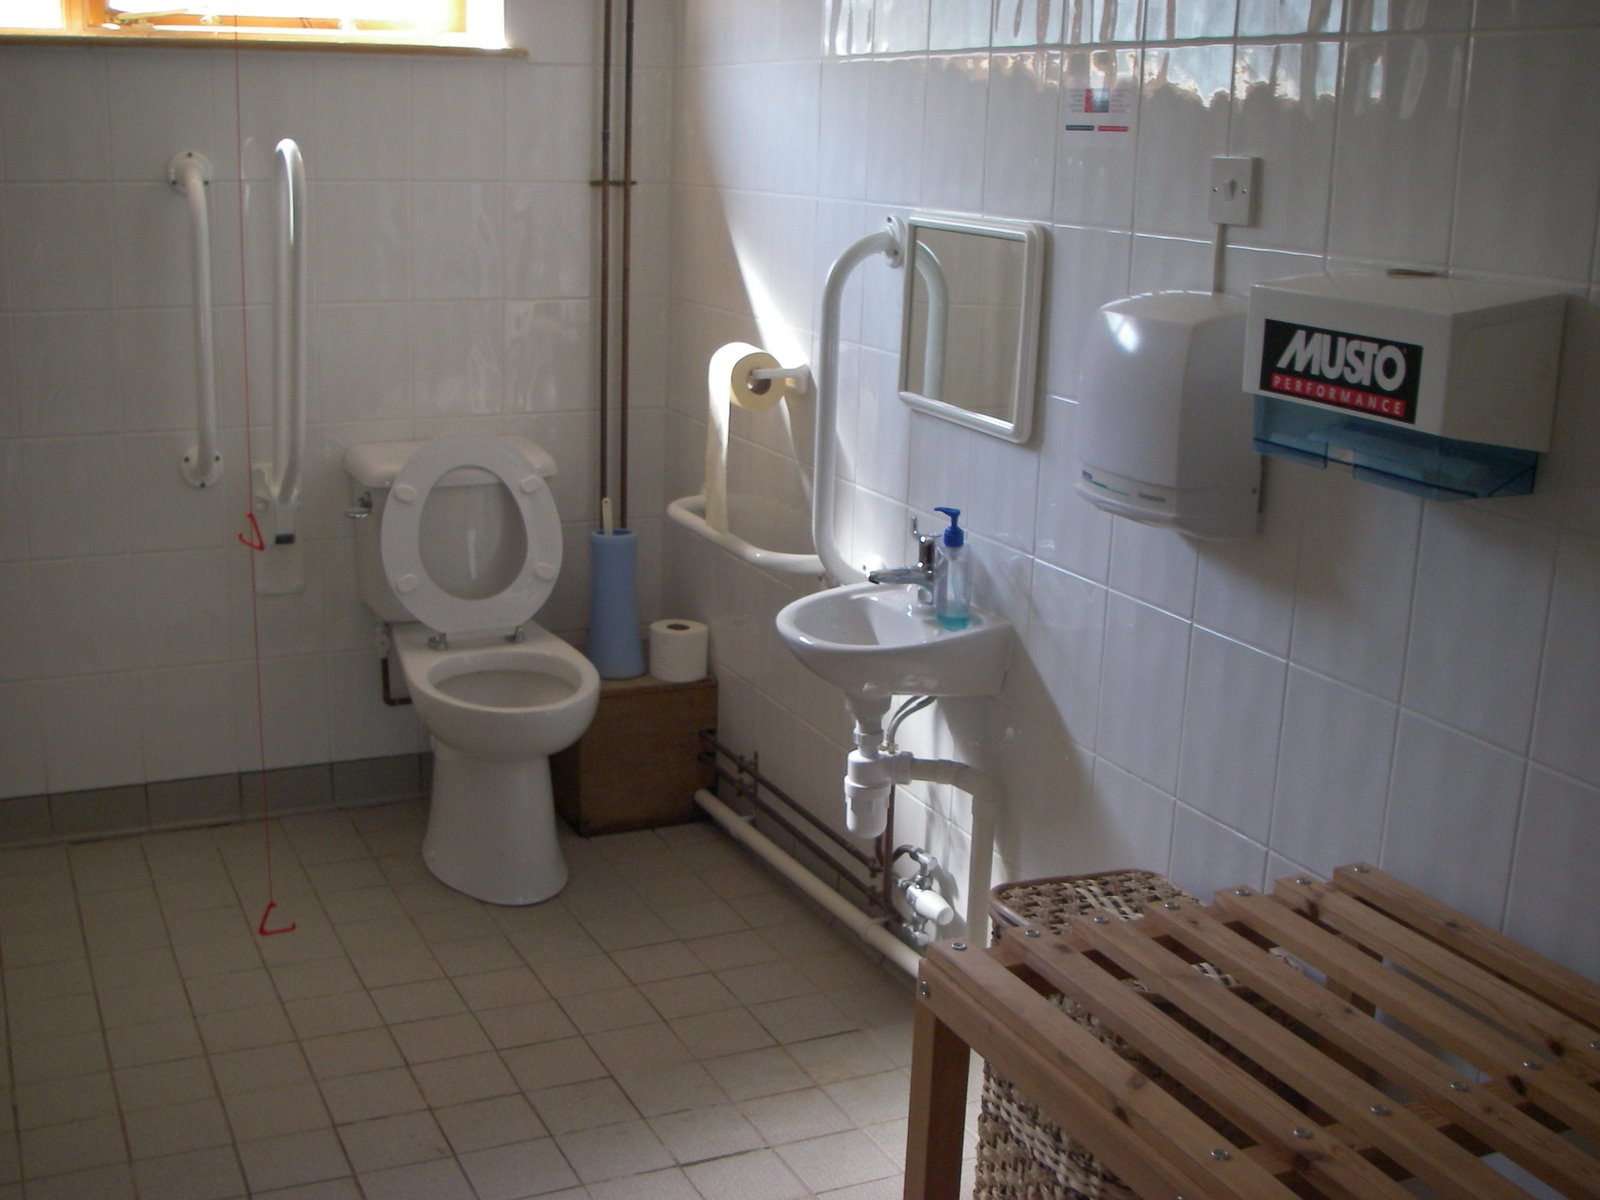 New Disabled Toilet Facilities